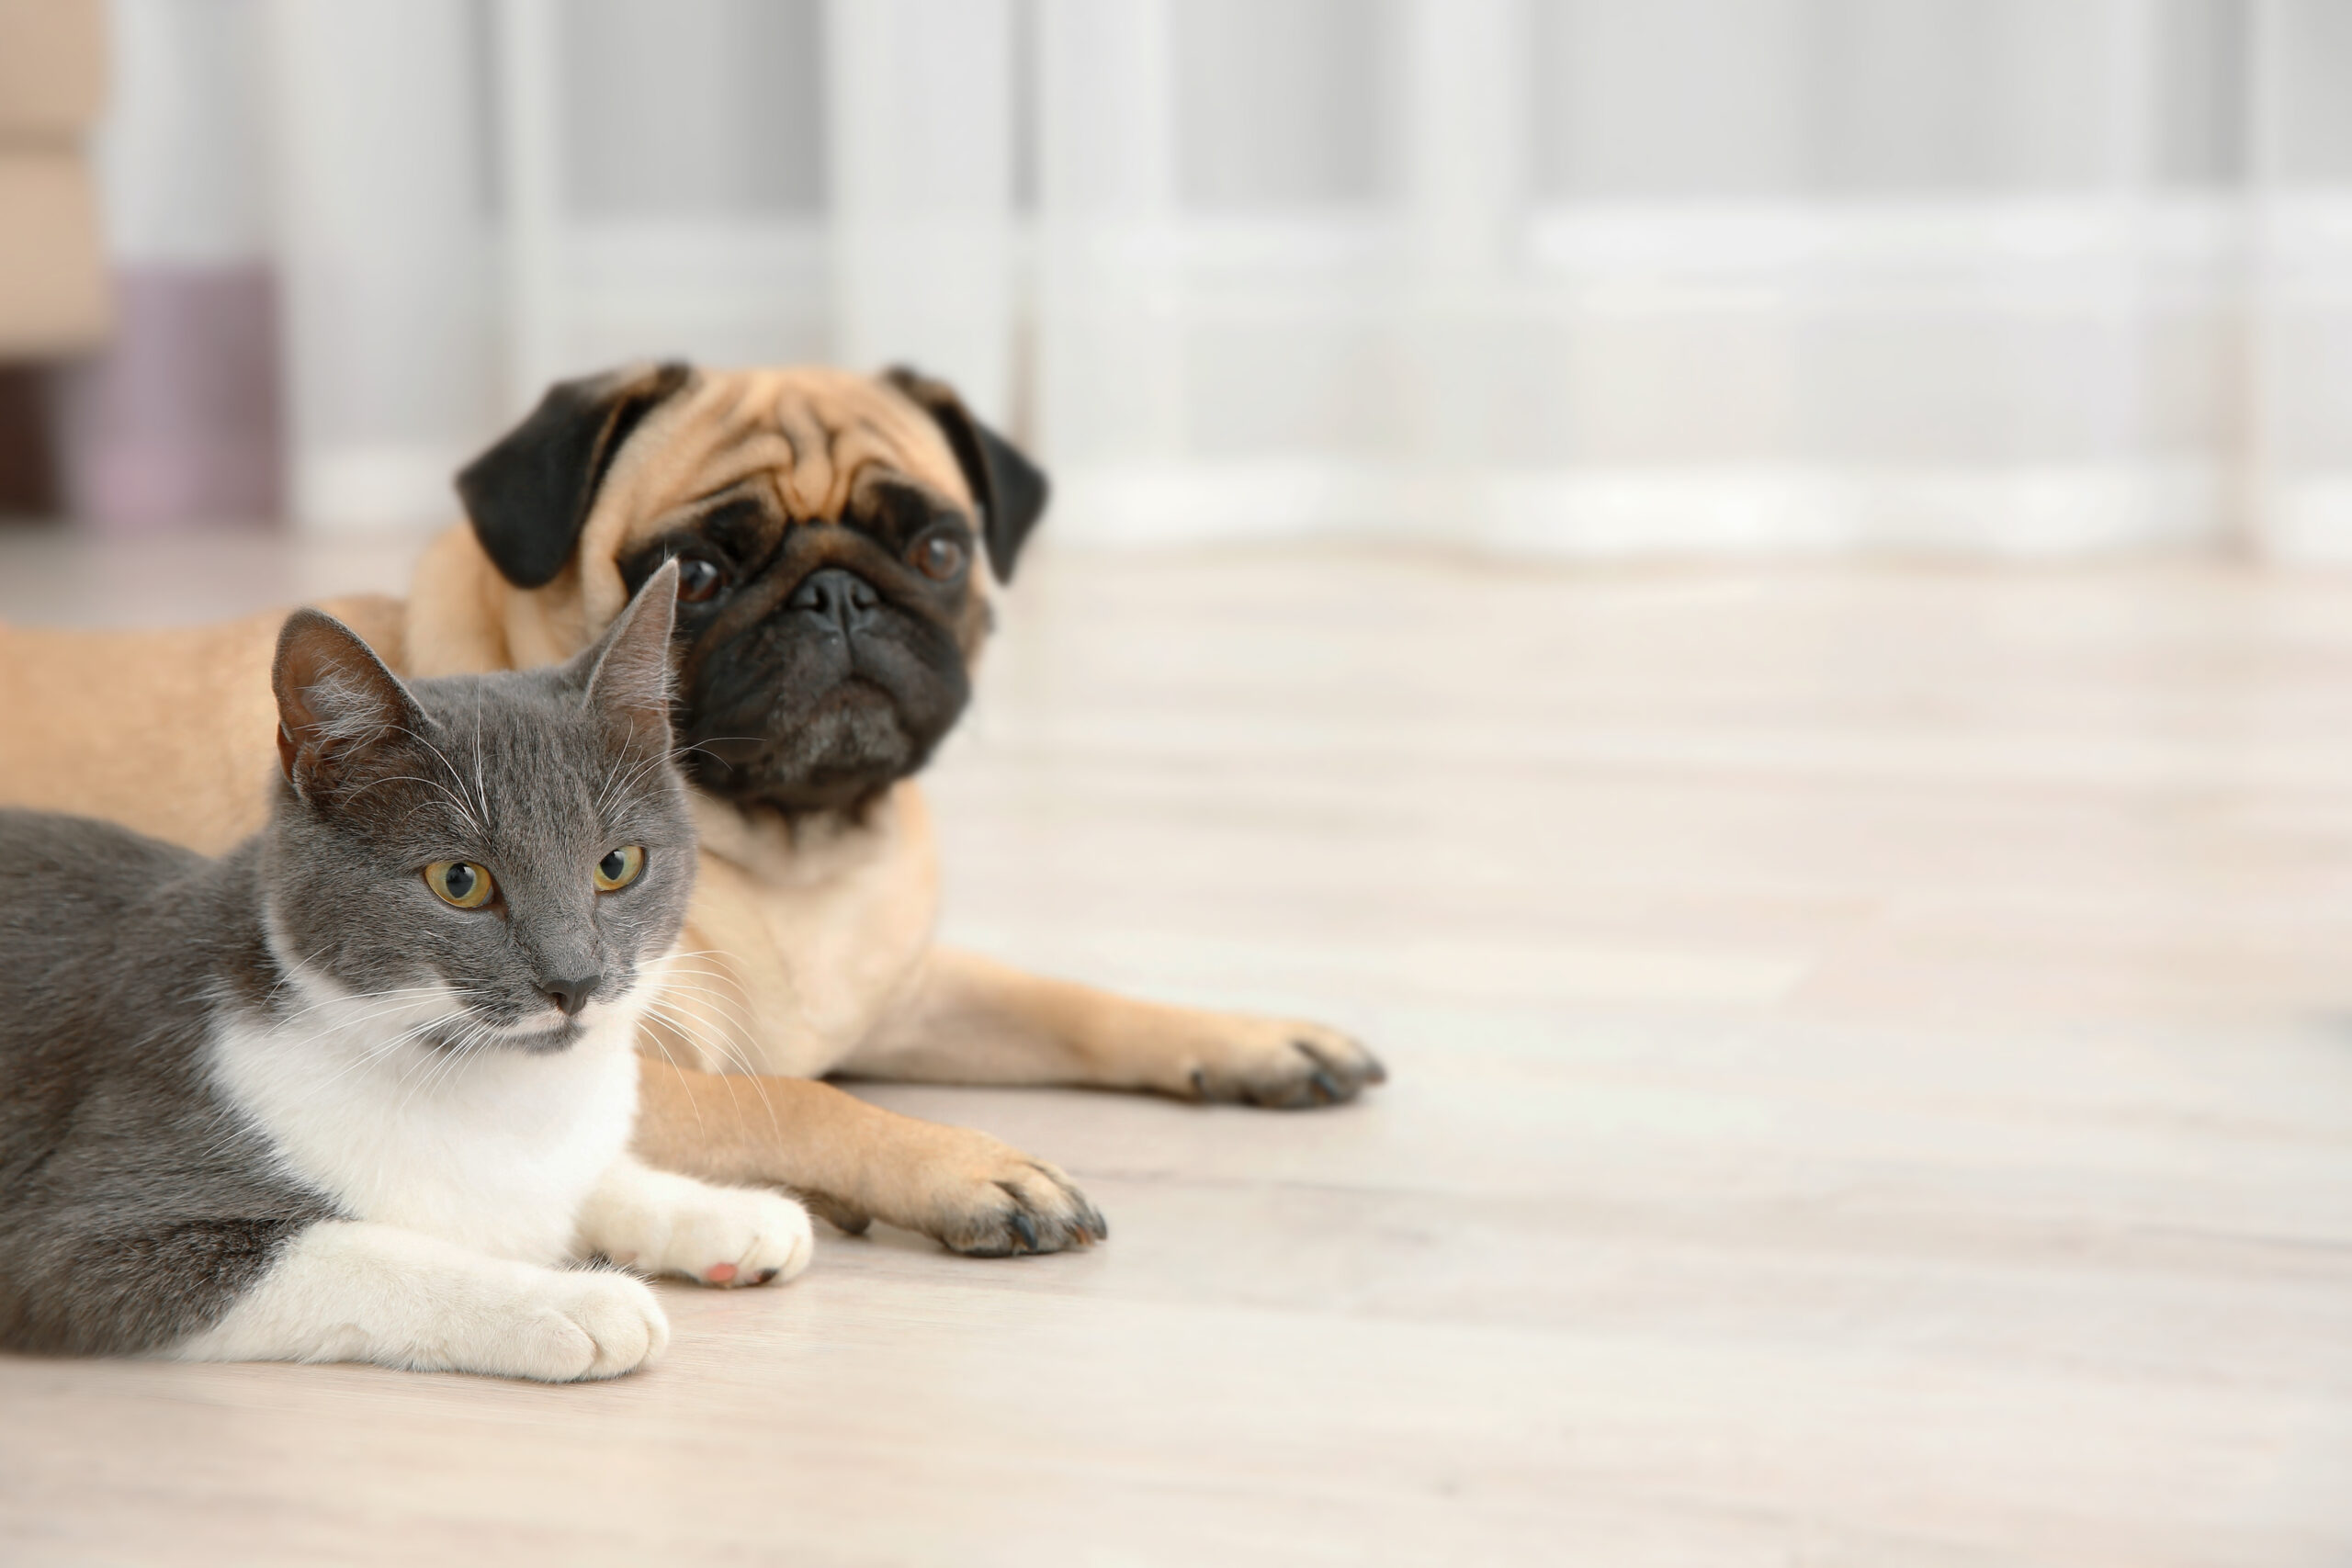 Cat and dog laying on floor